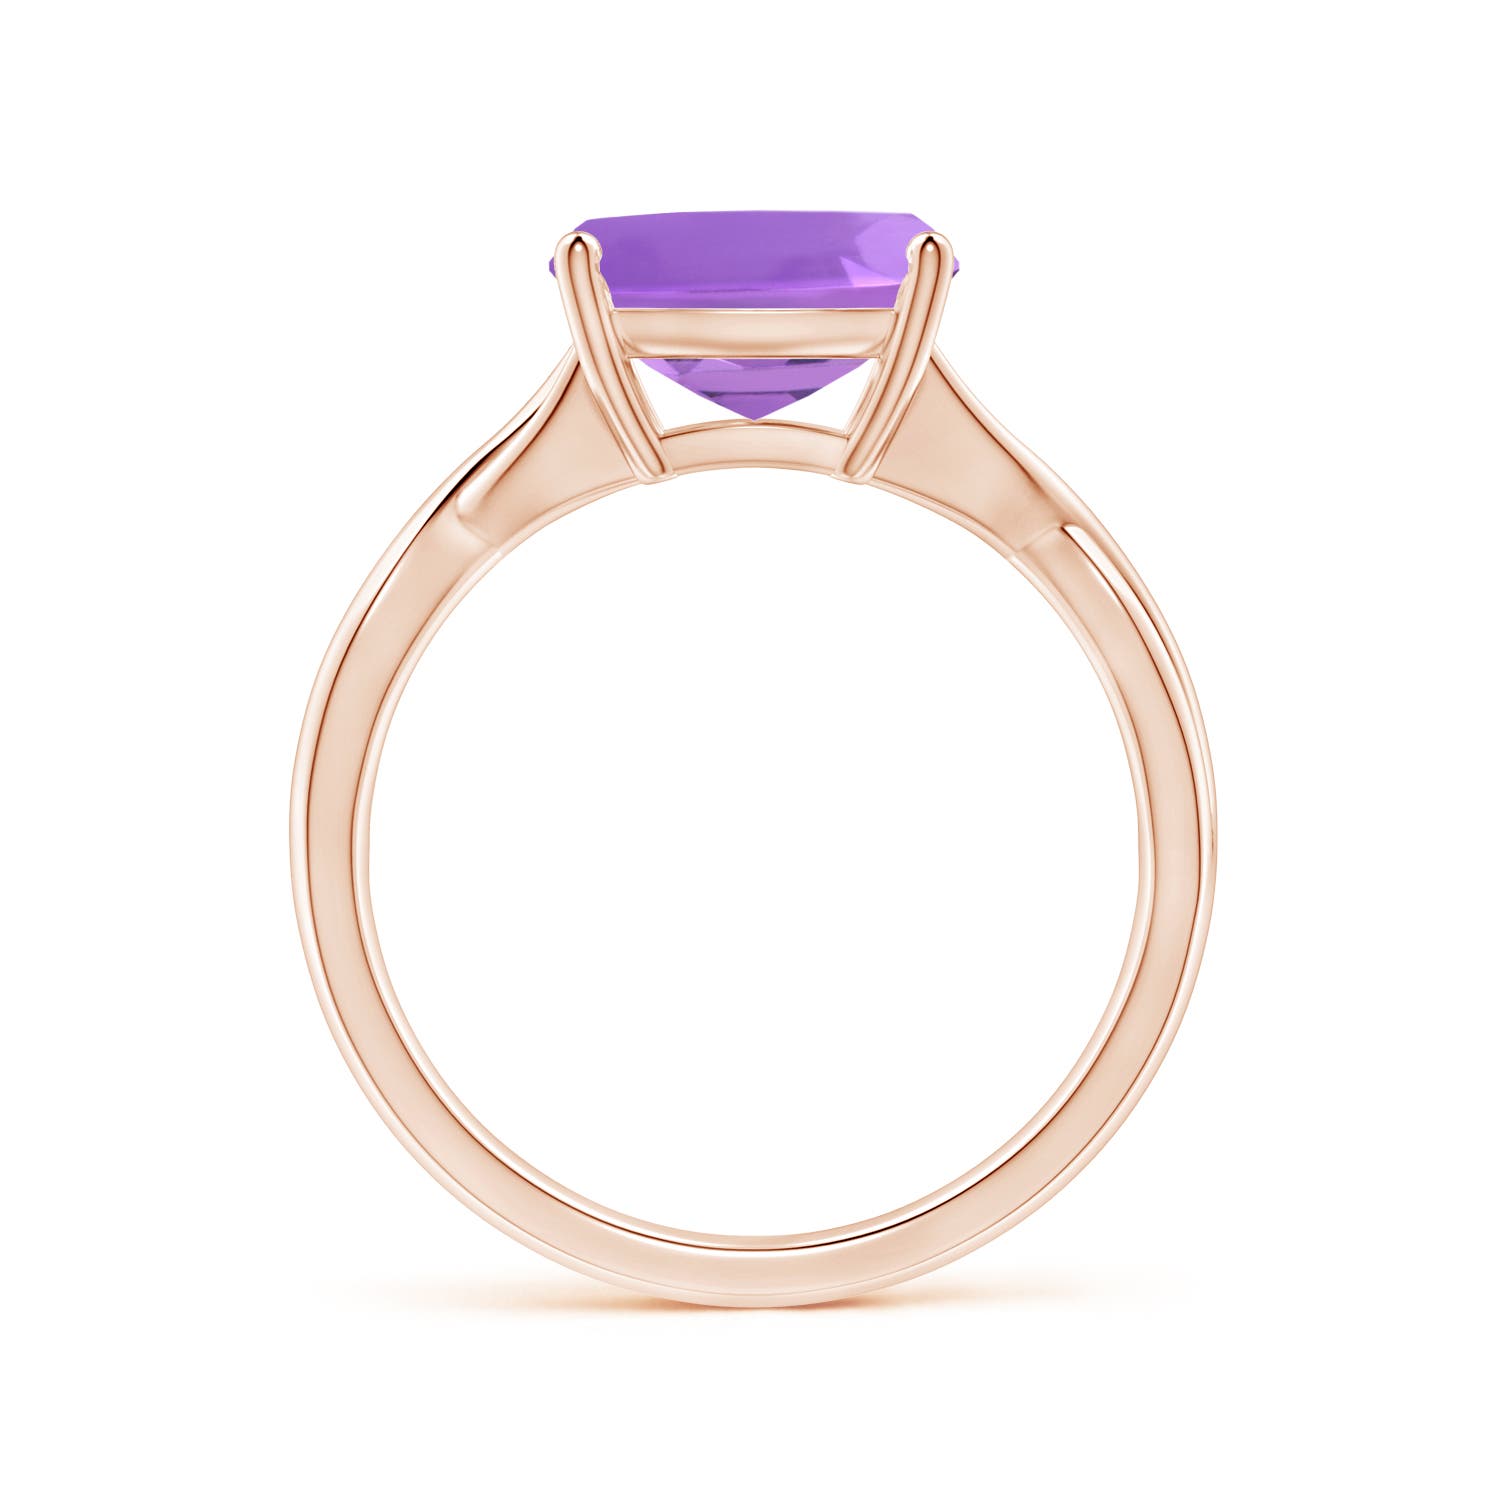 AA - Amethyst / 3.1 CT / 14 KT Rose Gold